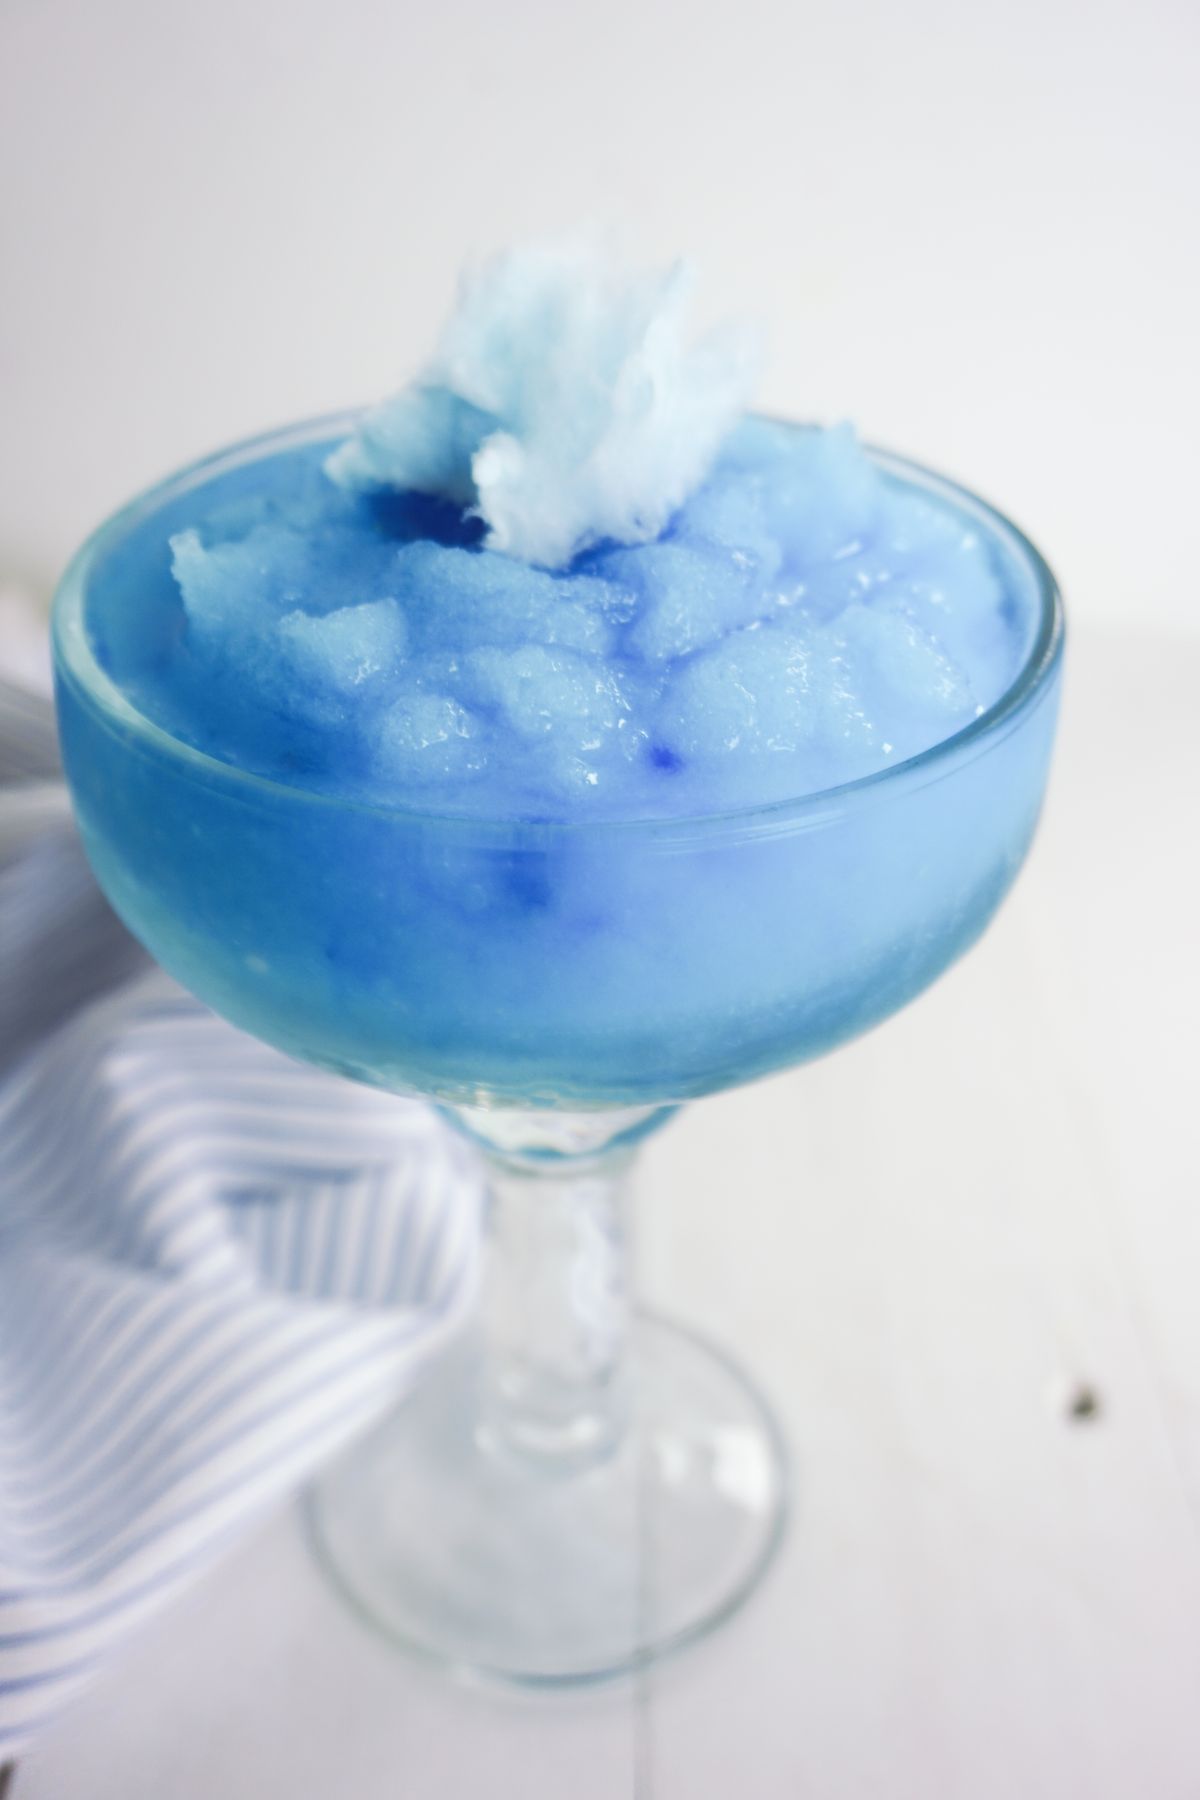 Cotton Candy Margarita in a serving glass, garnished with cotton candy.